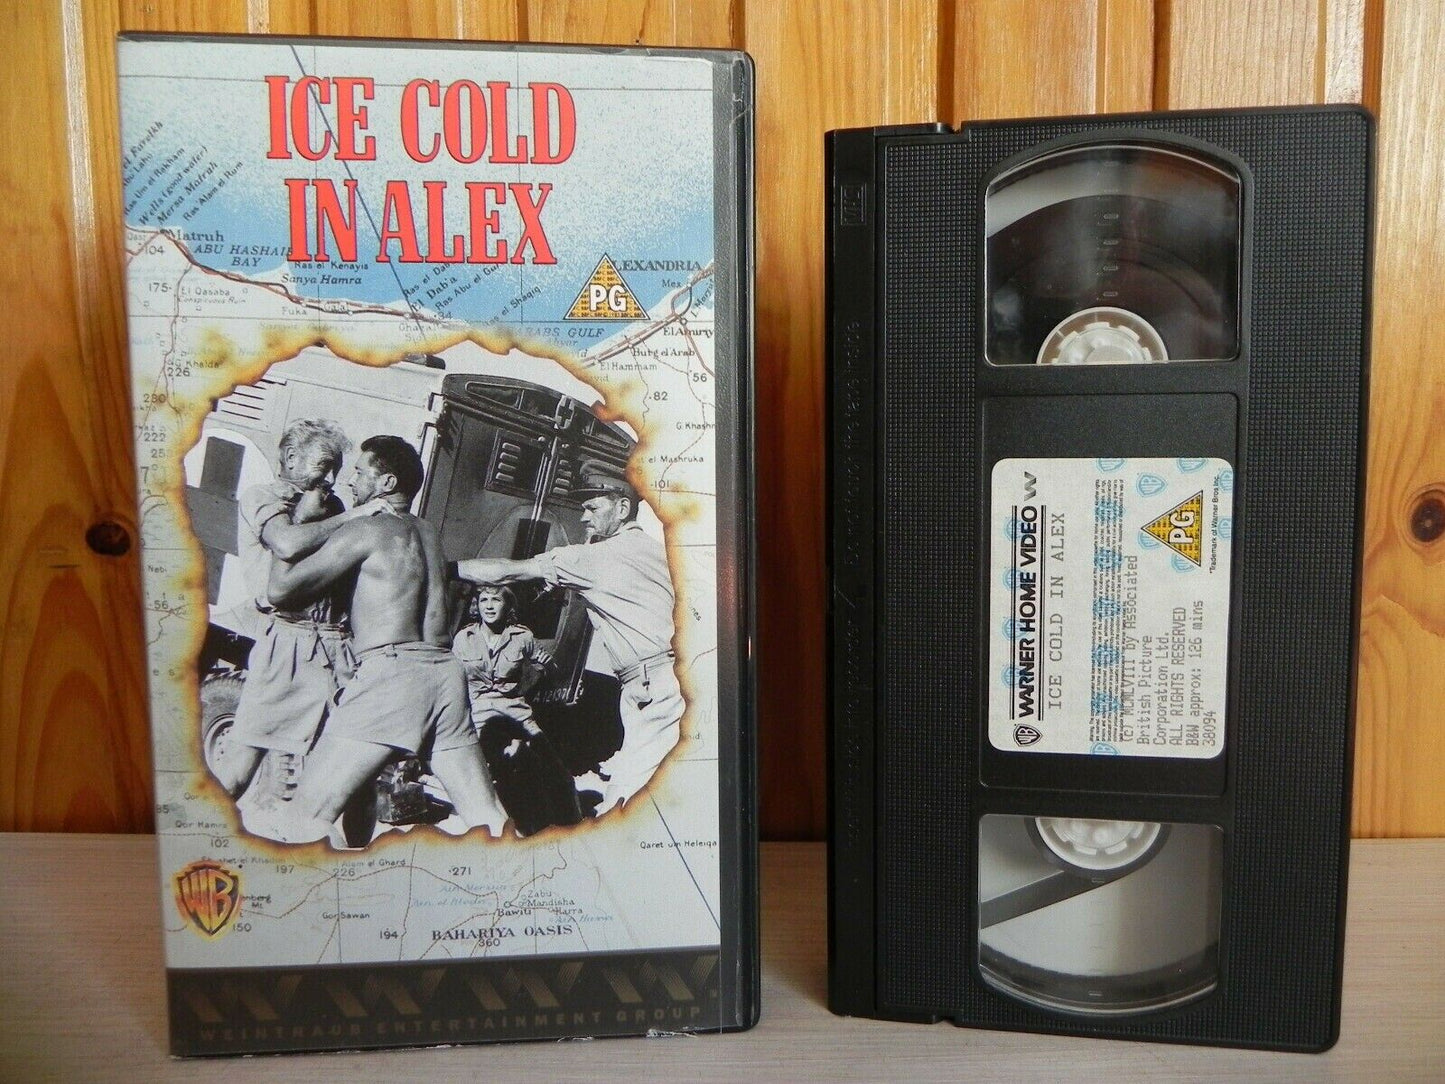 Ice Cold In Alex - Warner Home Video - Action - Adventure - John Mills - Pal VHS-